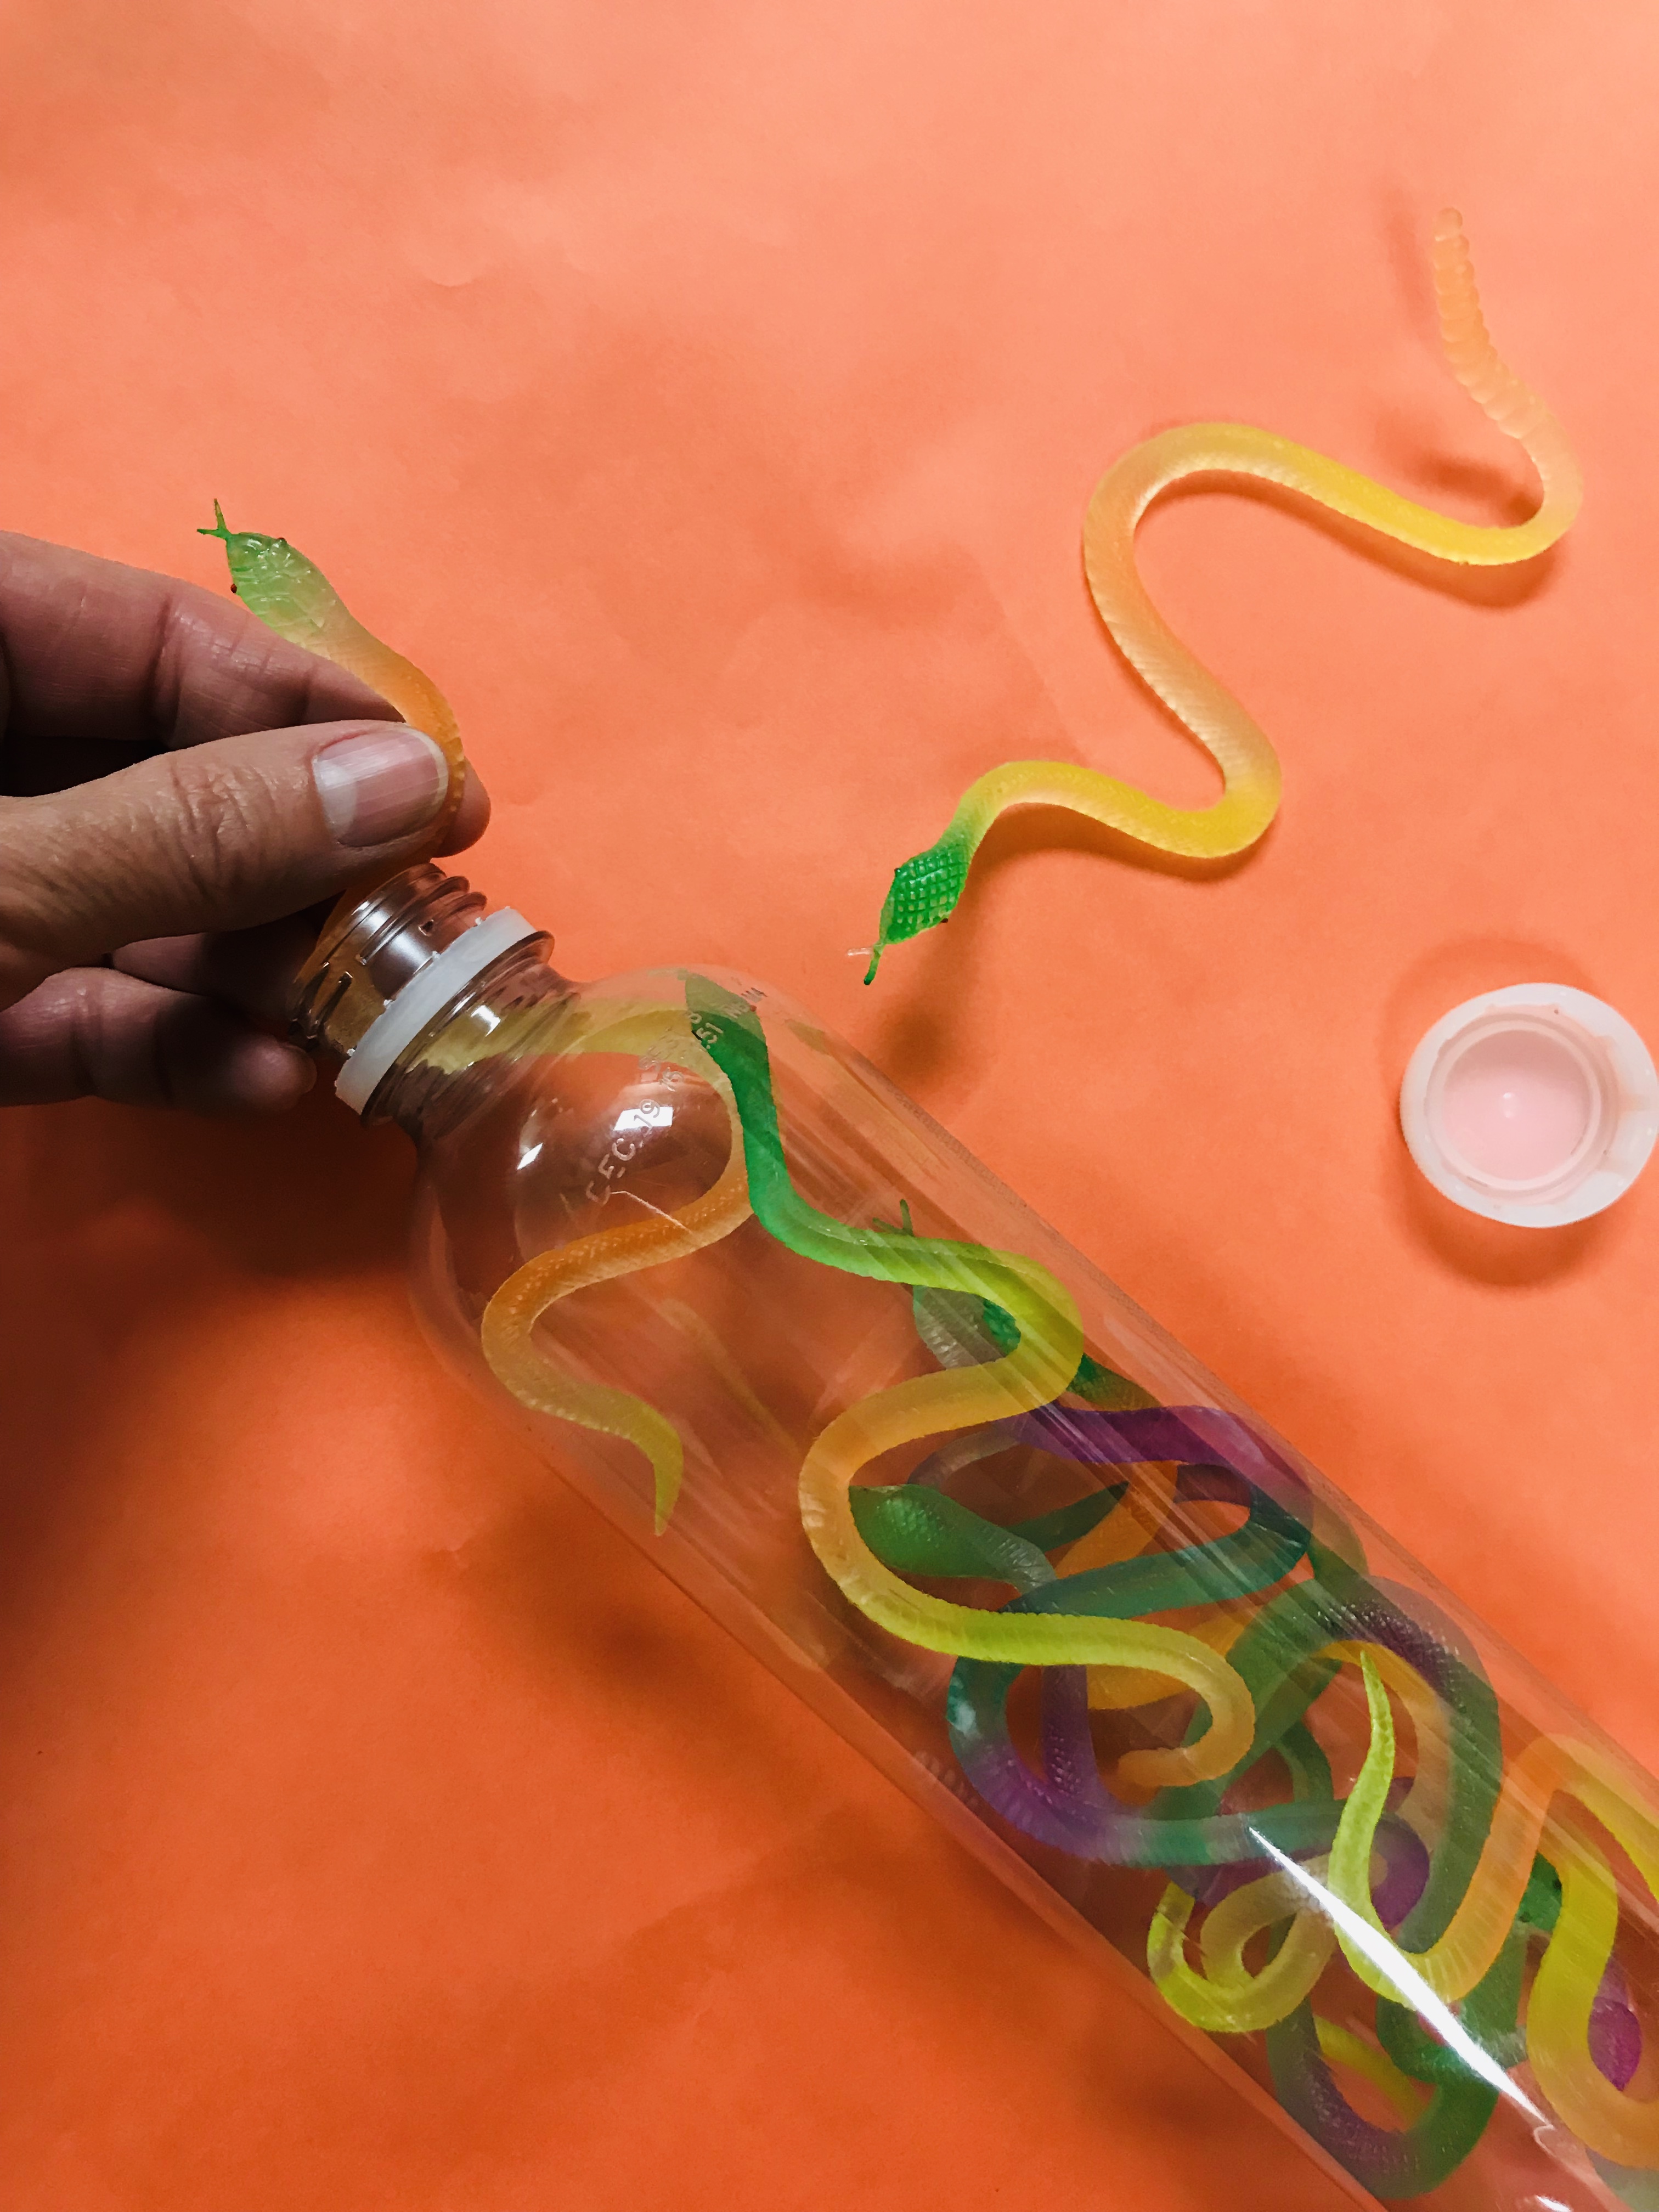 Bottle of toy snakes